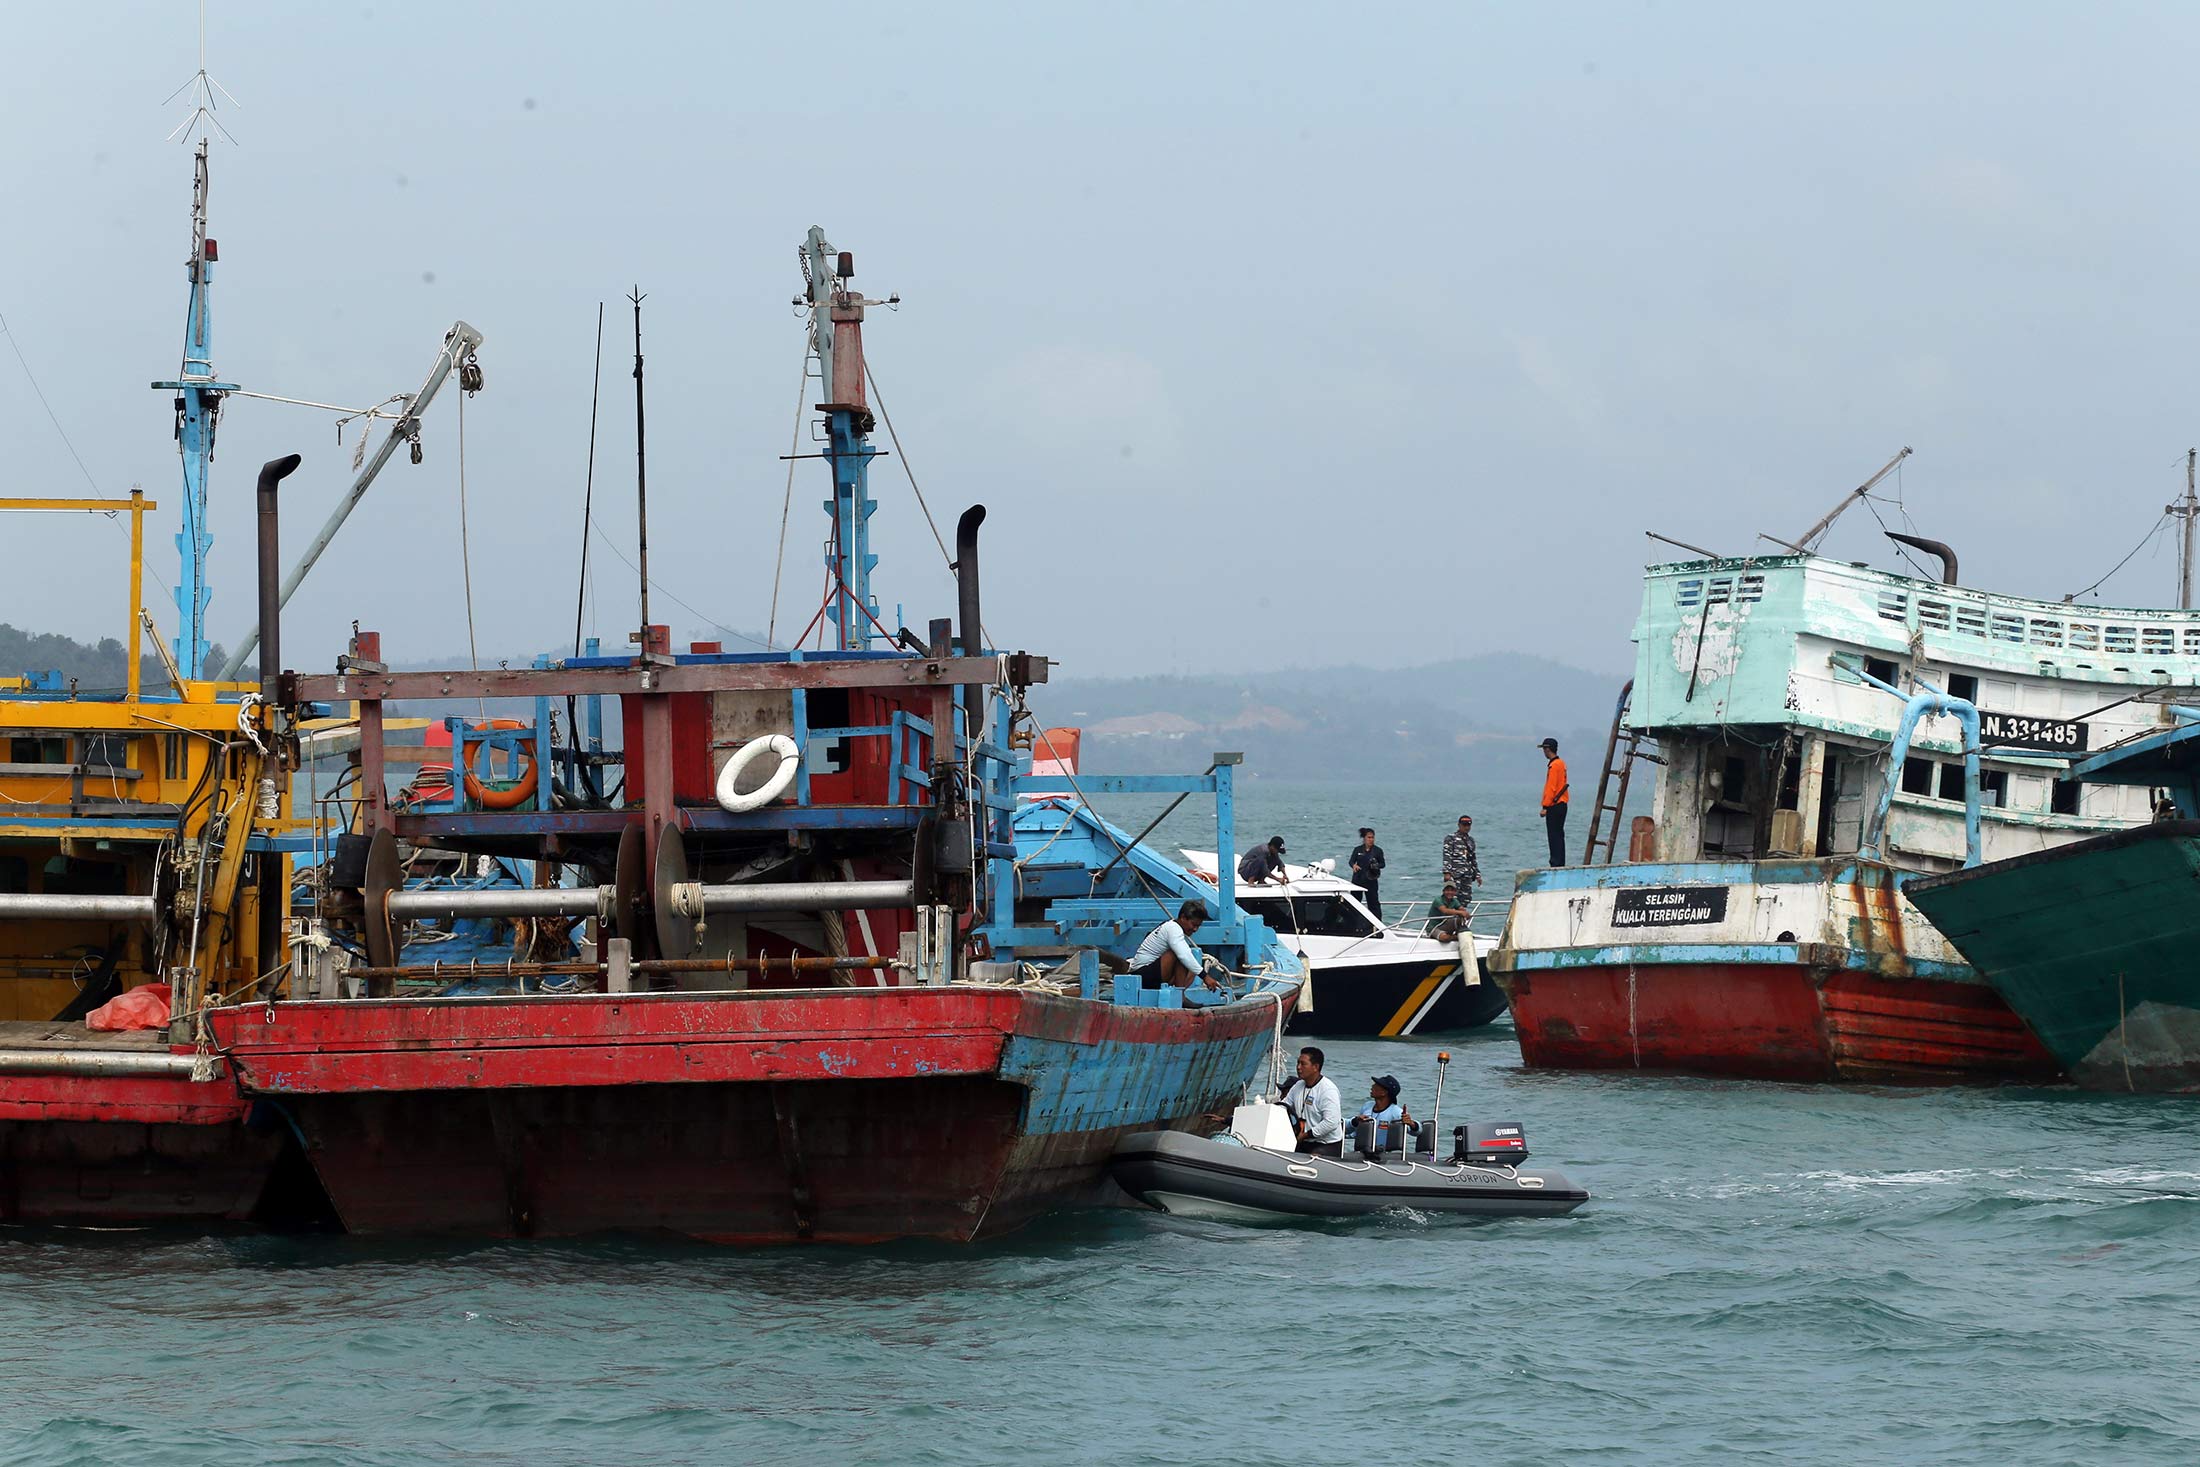 Chinese Fisherman Porn - Indonesia to Sink 71 Foreign Fishing Boats Amid South China Sea Tensions -  Bloomberg